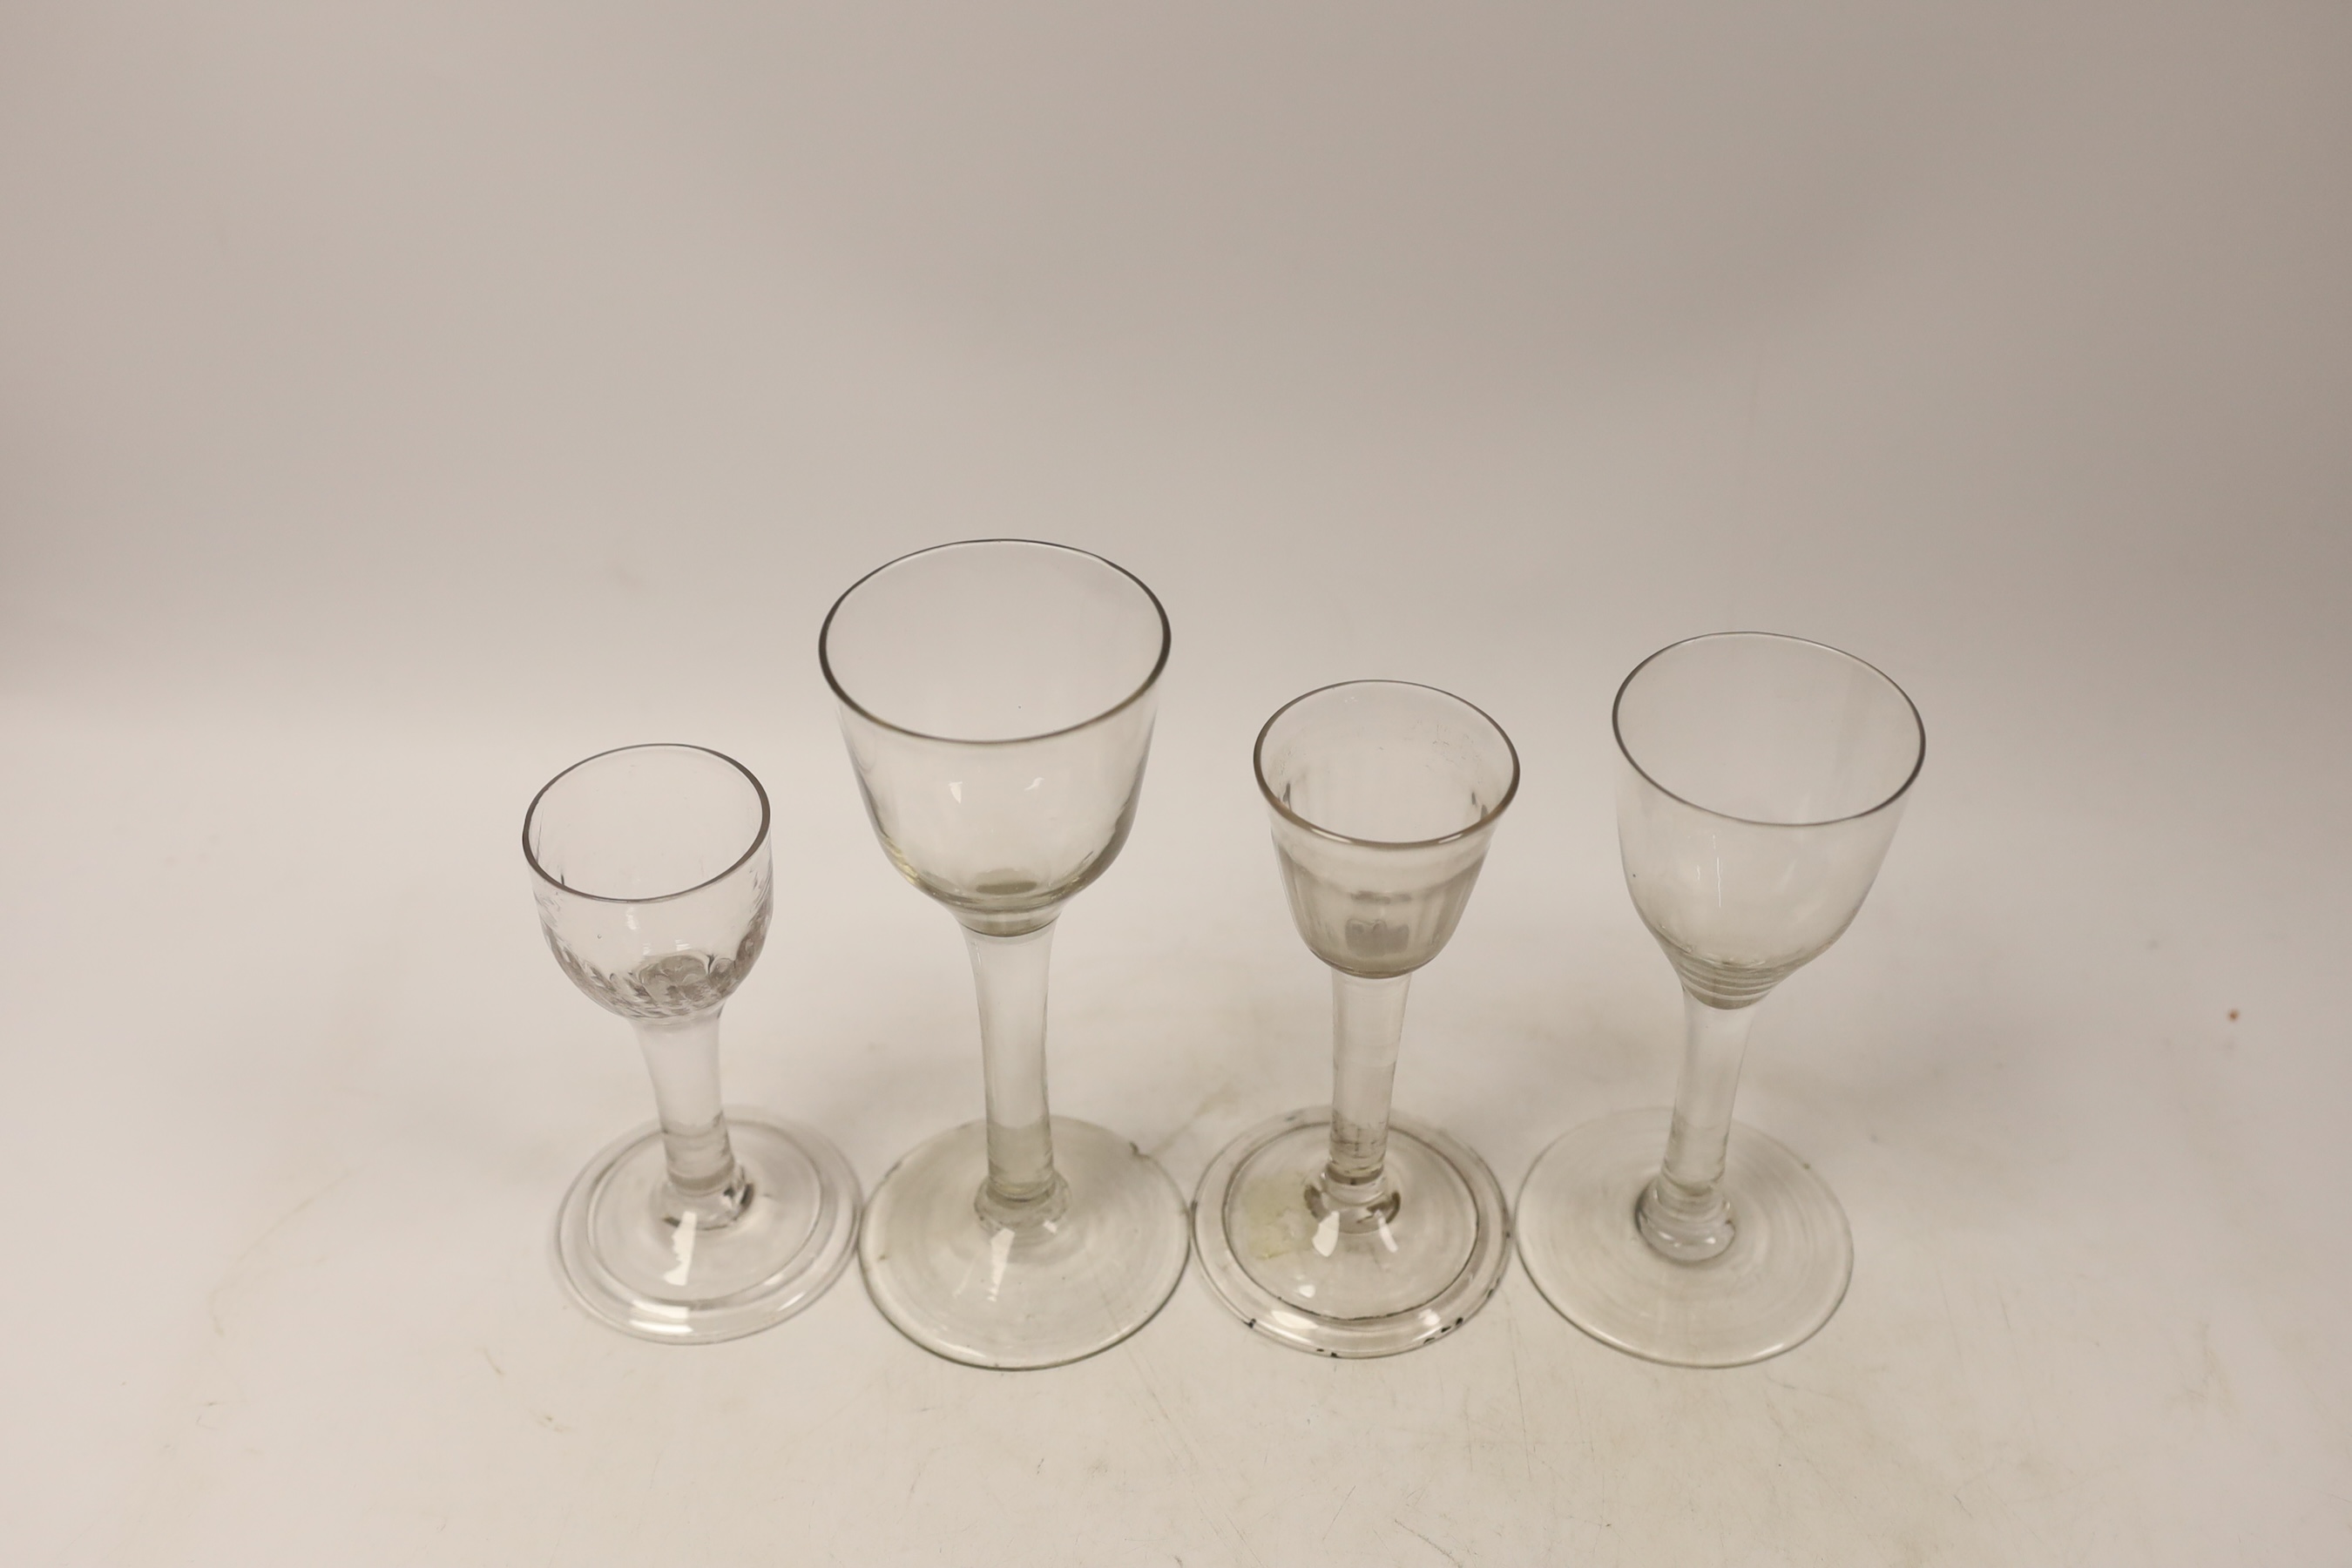 Four plain stem wine and cordial glasses, first half 18th century, two examples with folded feet, tallest 16.5cm